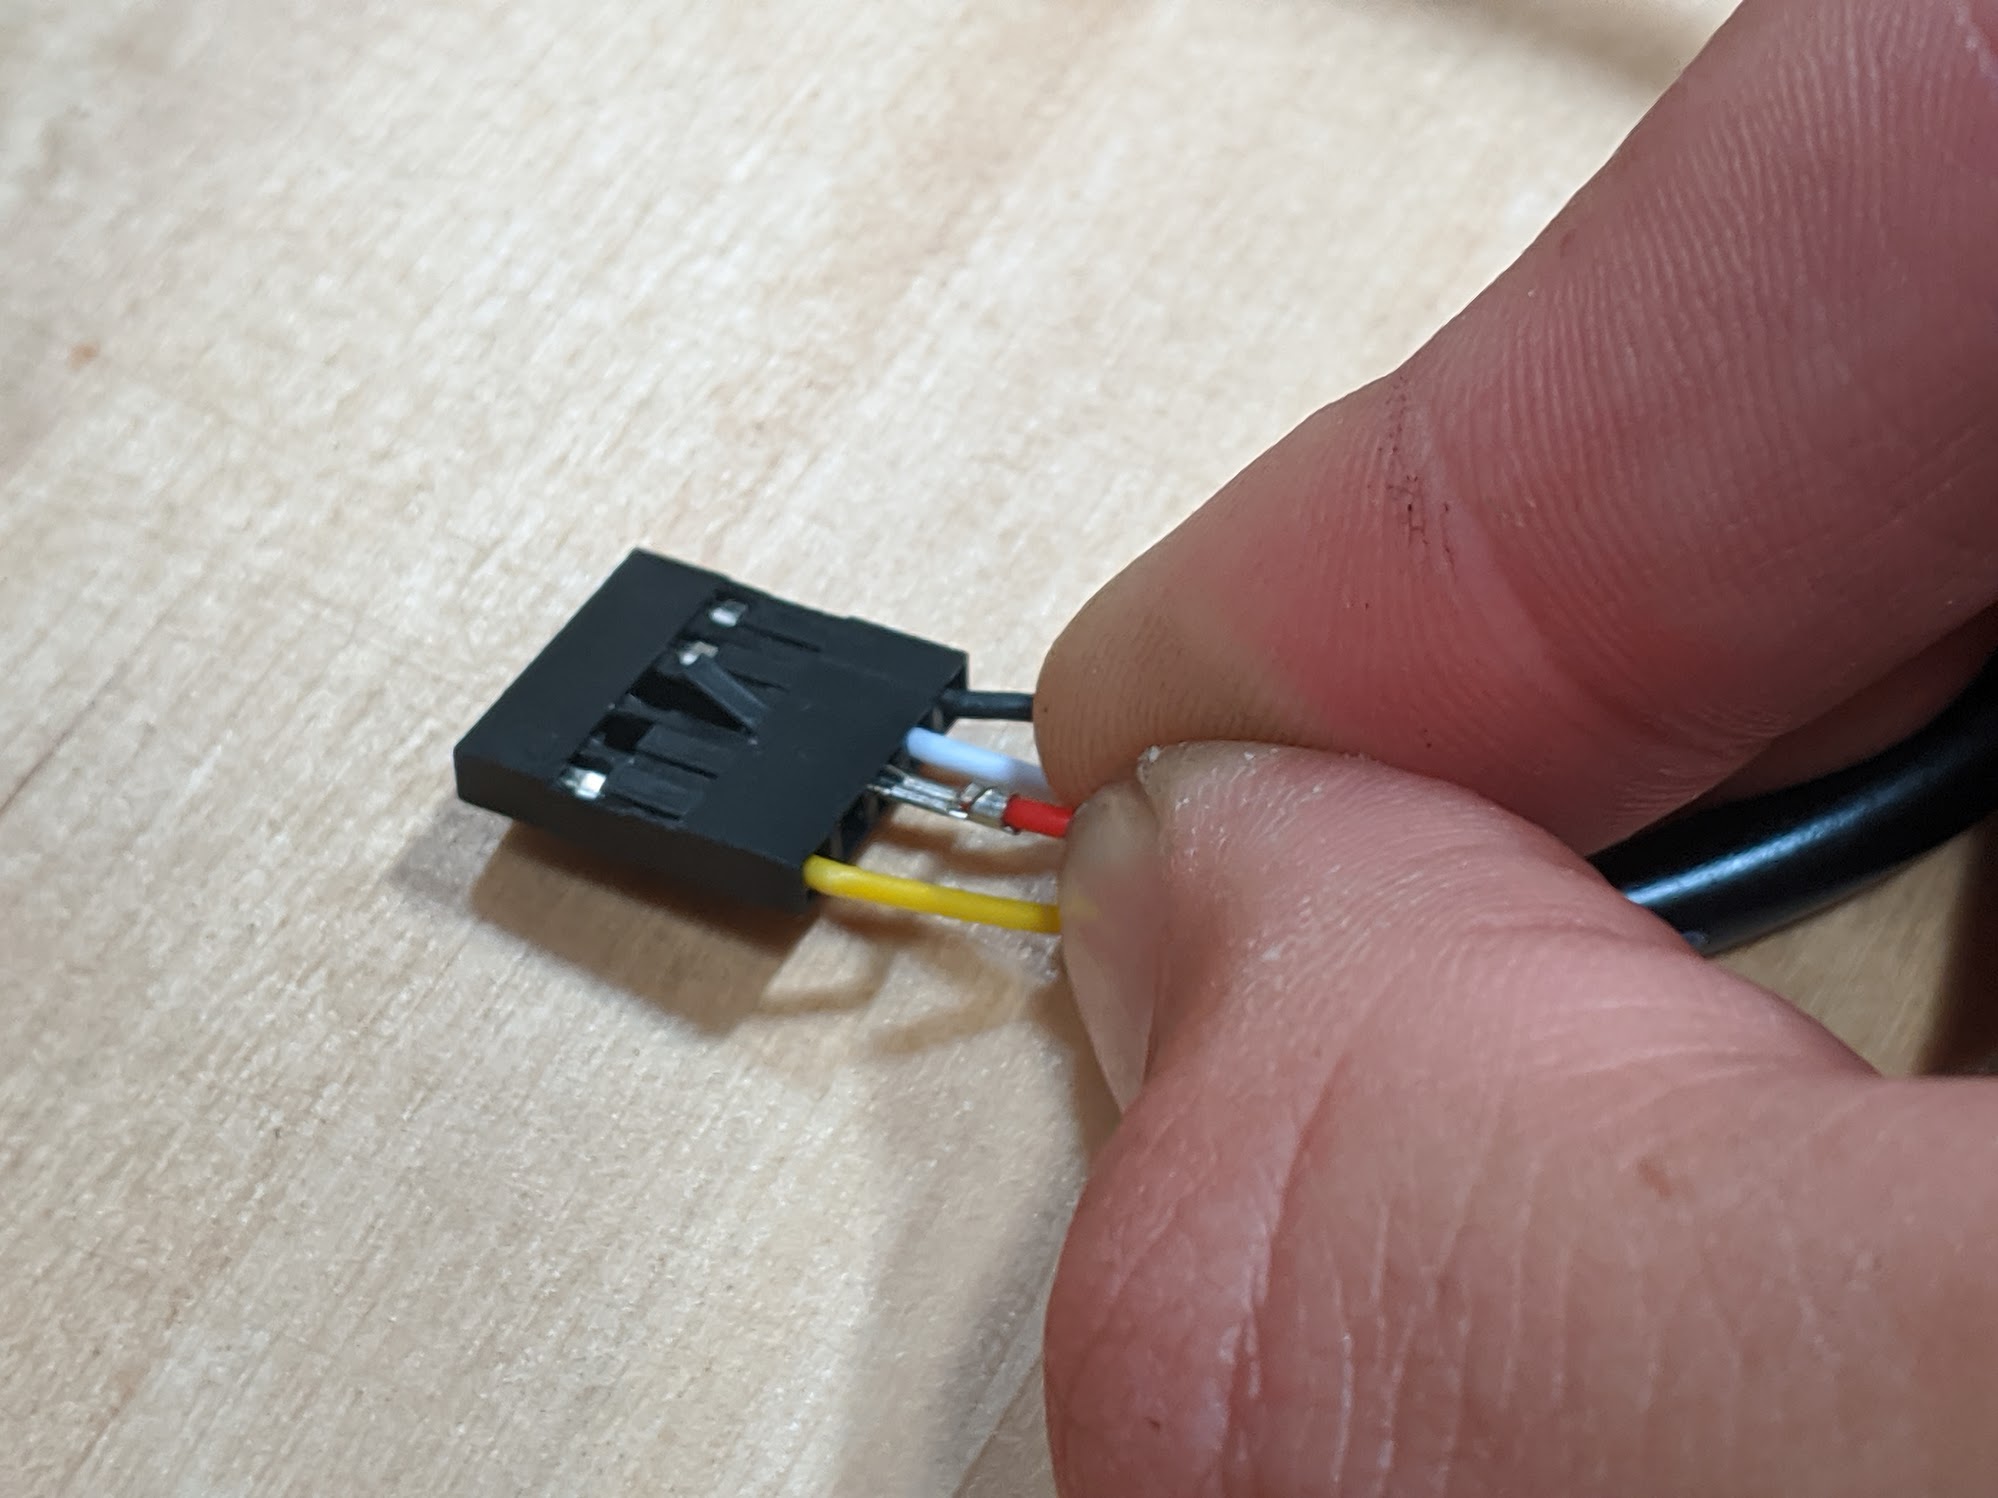 remove red wire from connector